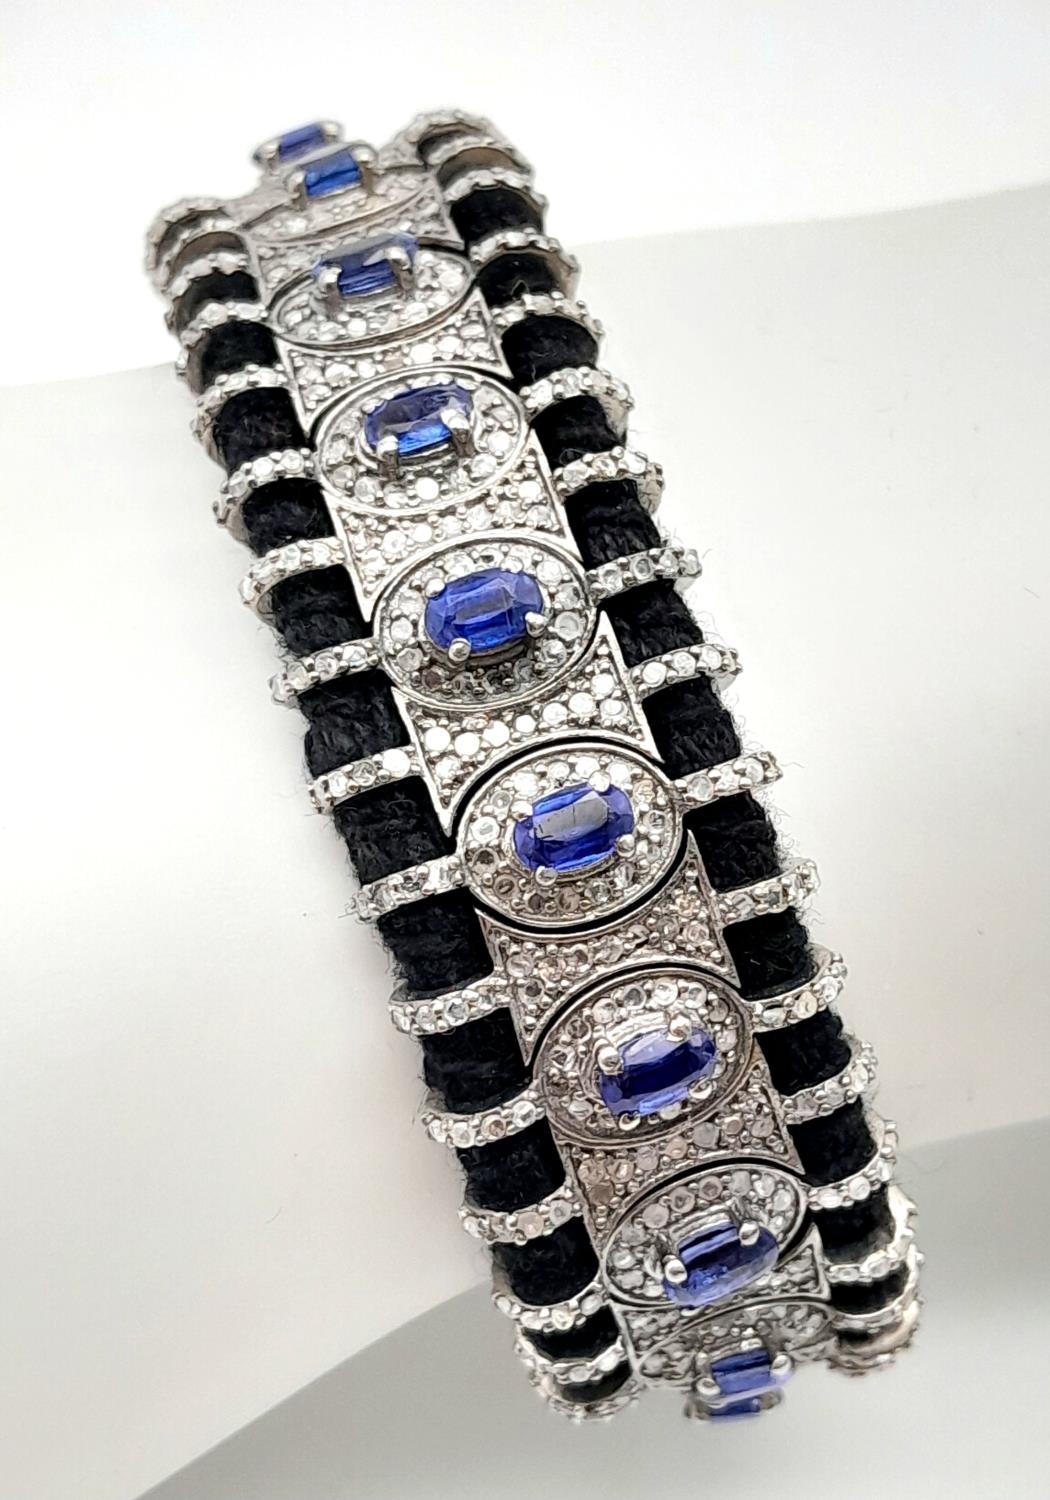 A Hand-Crafted Blue Sapphire and Diamond Encrusted Bracelet. Black textile set. Sapphires - 5ctw.